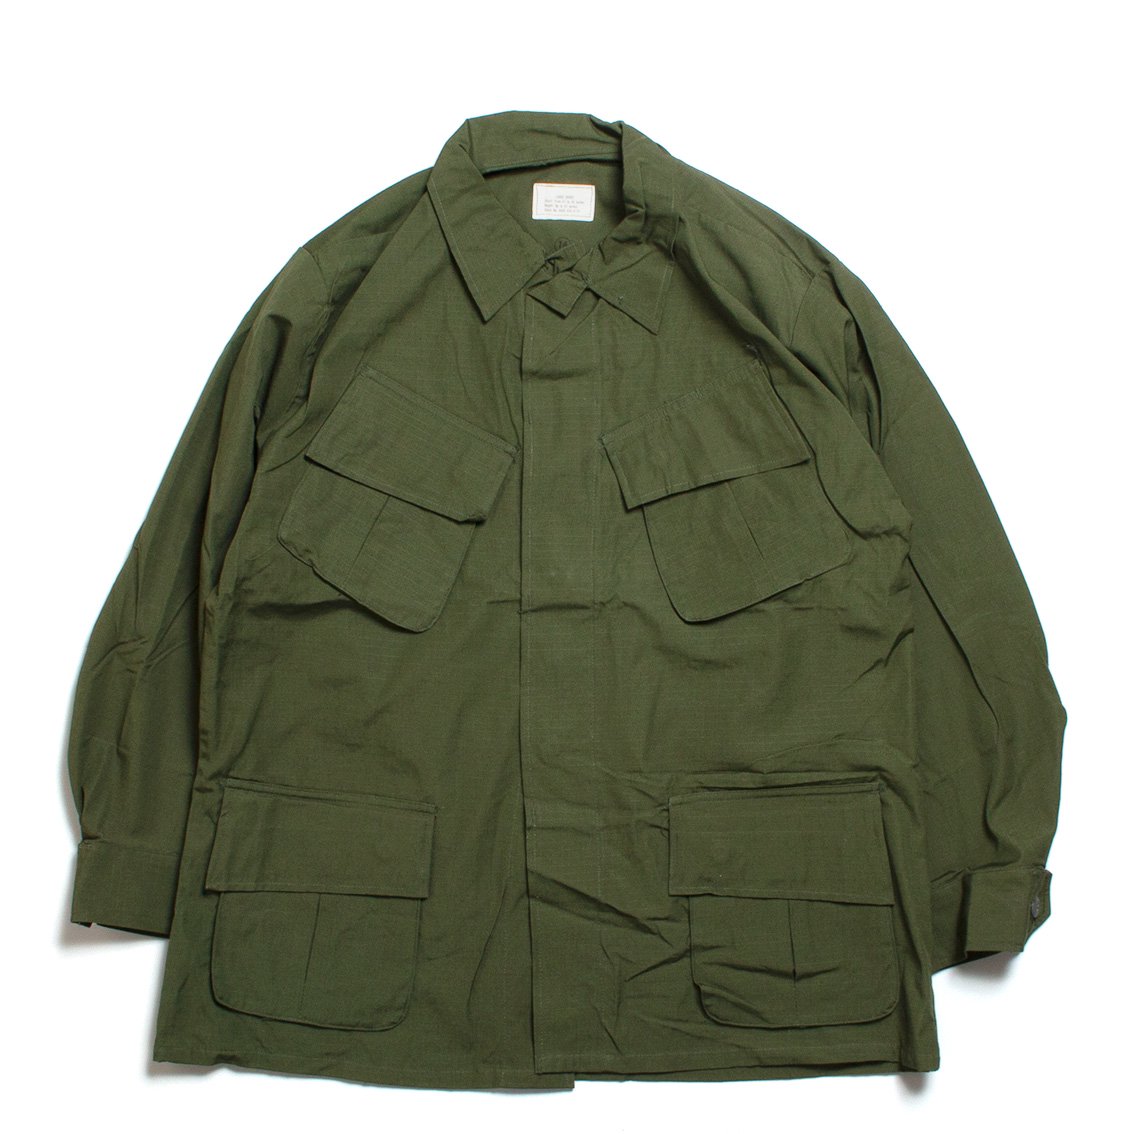 [US ARMY / アメリカ軍] JUNGLE FATIGUE JACKET 5TH ジャングルファティーグ ジャケット (DEAD STOCK)  - HARTLEY